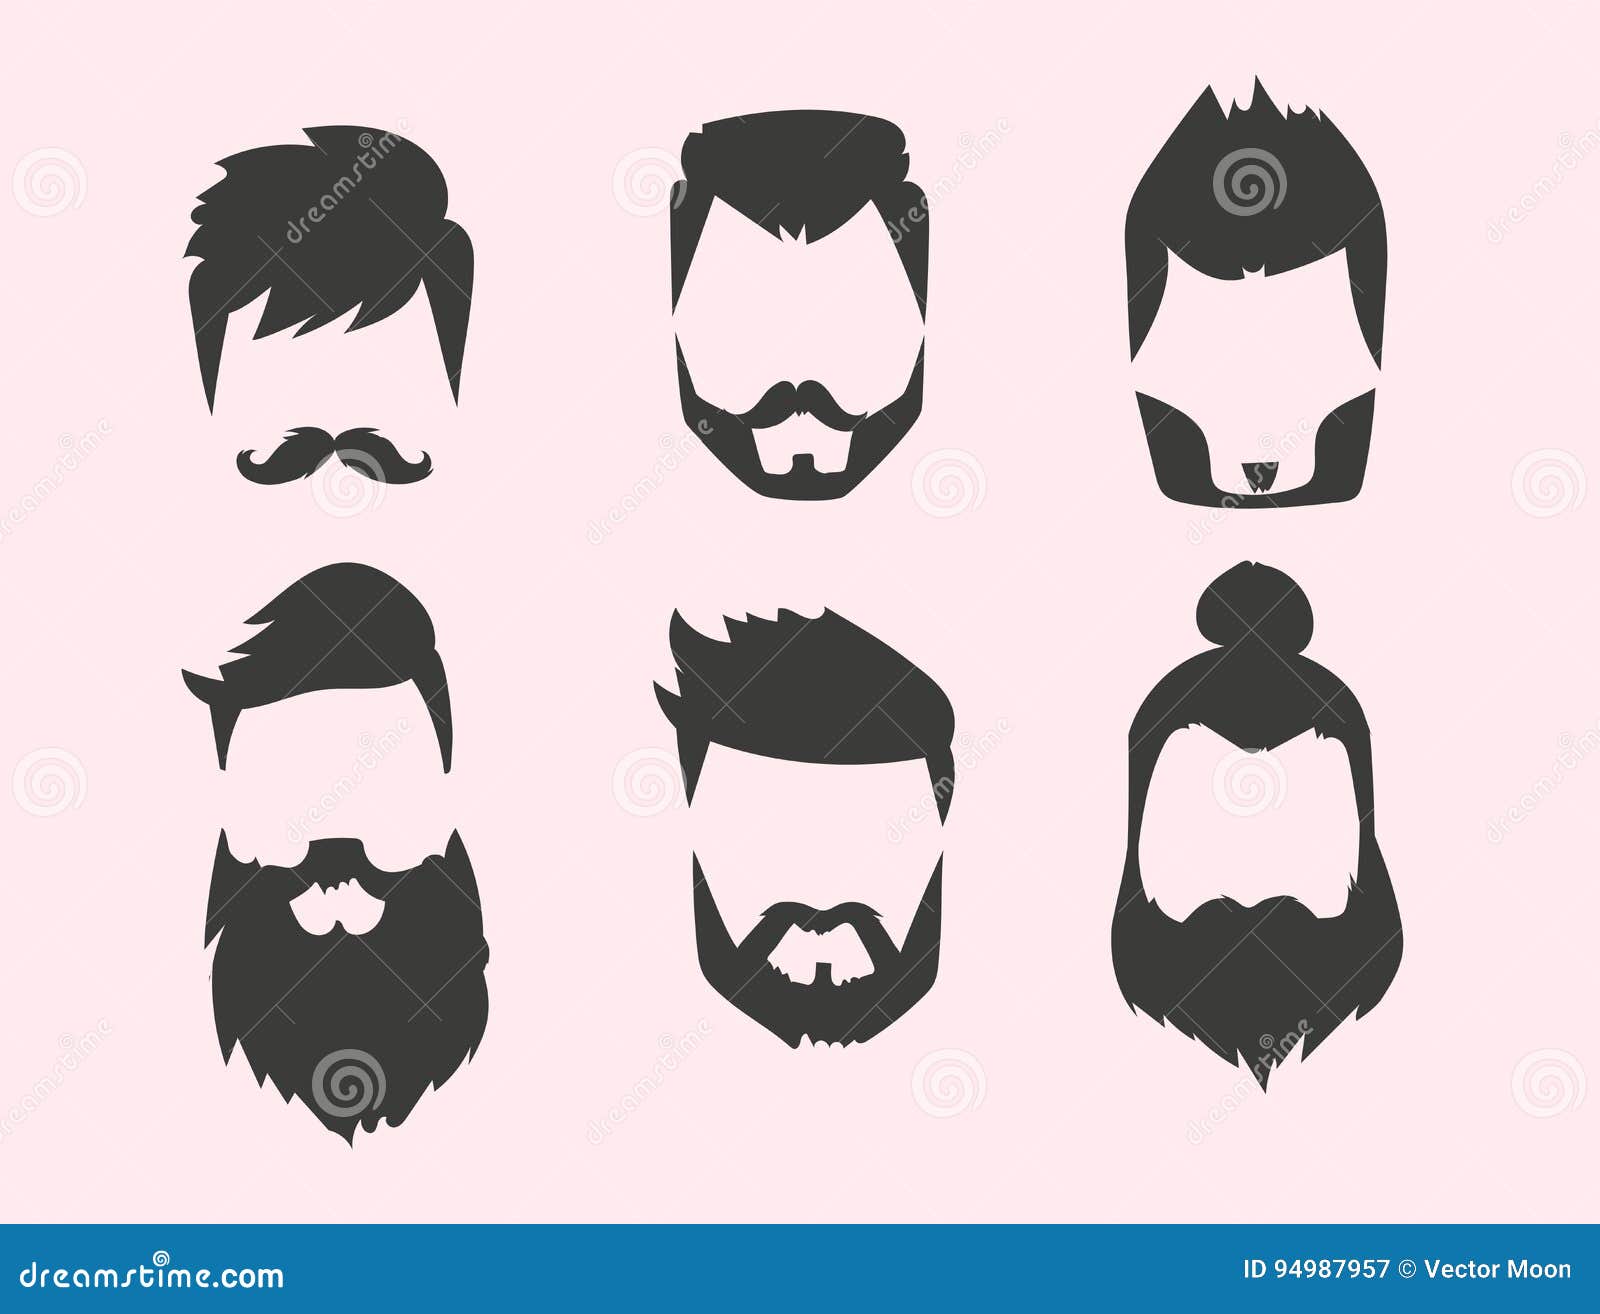 Vector Set of Hipster Retro Hair Style Mustache Vintage Old Shave Male  Facial Beard Haircut Illustration Stock Vector - Illustration of hairstyle,  human: 94987957